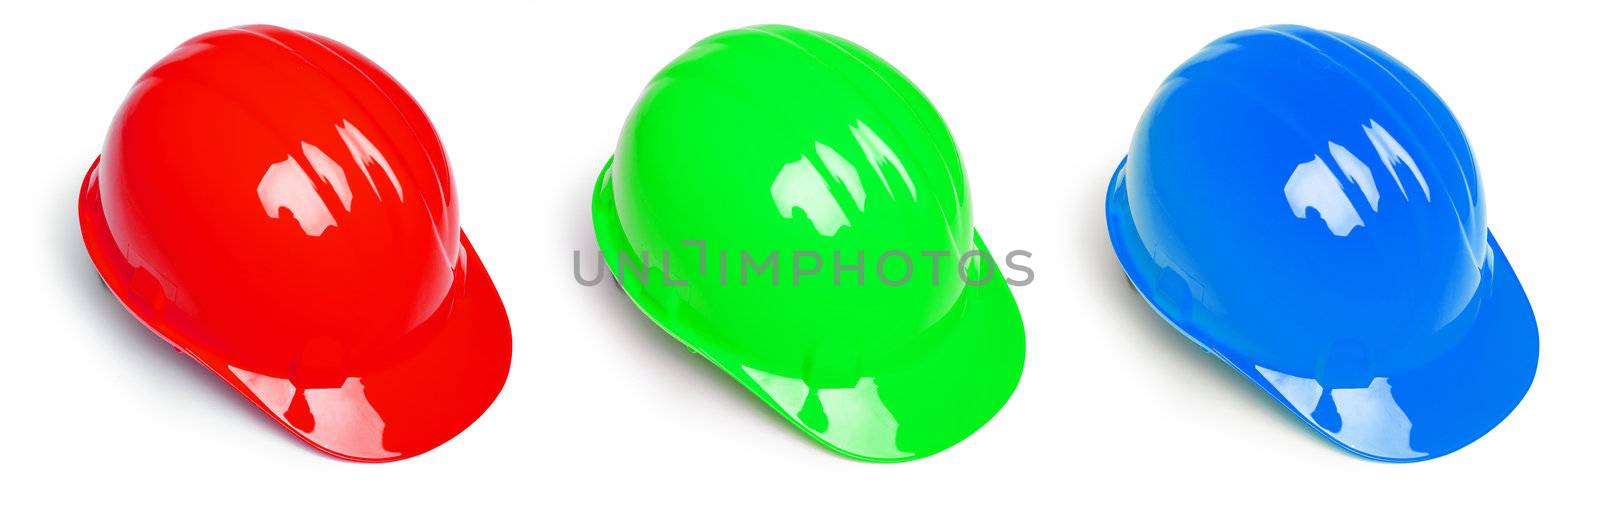 Red Green and Blue Hardhat by adamr